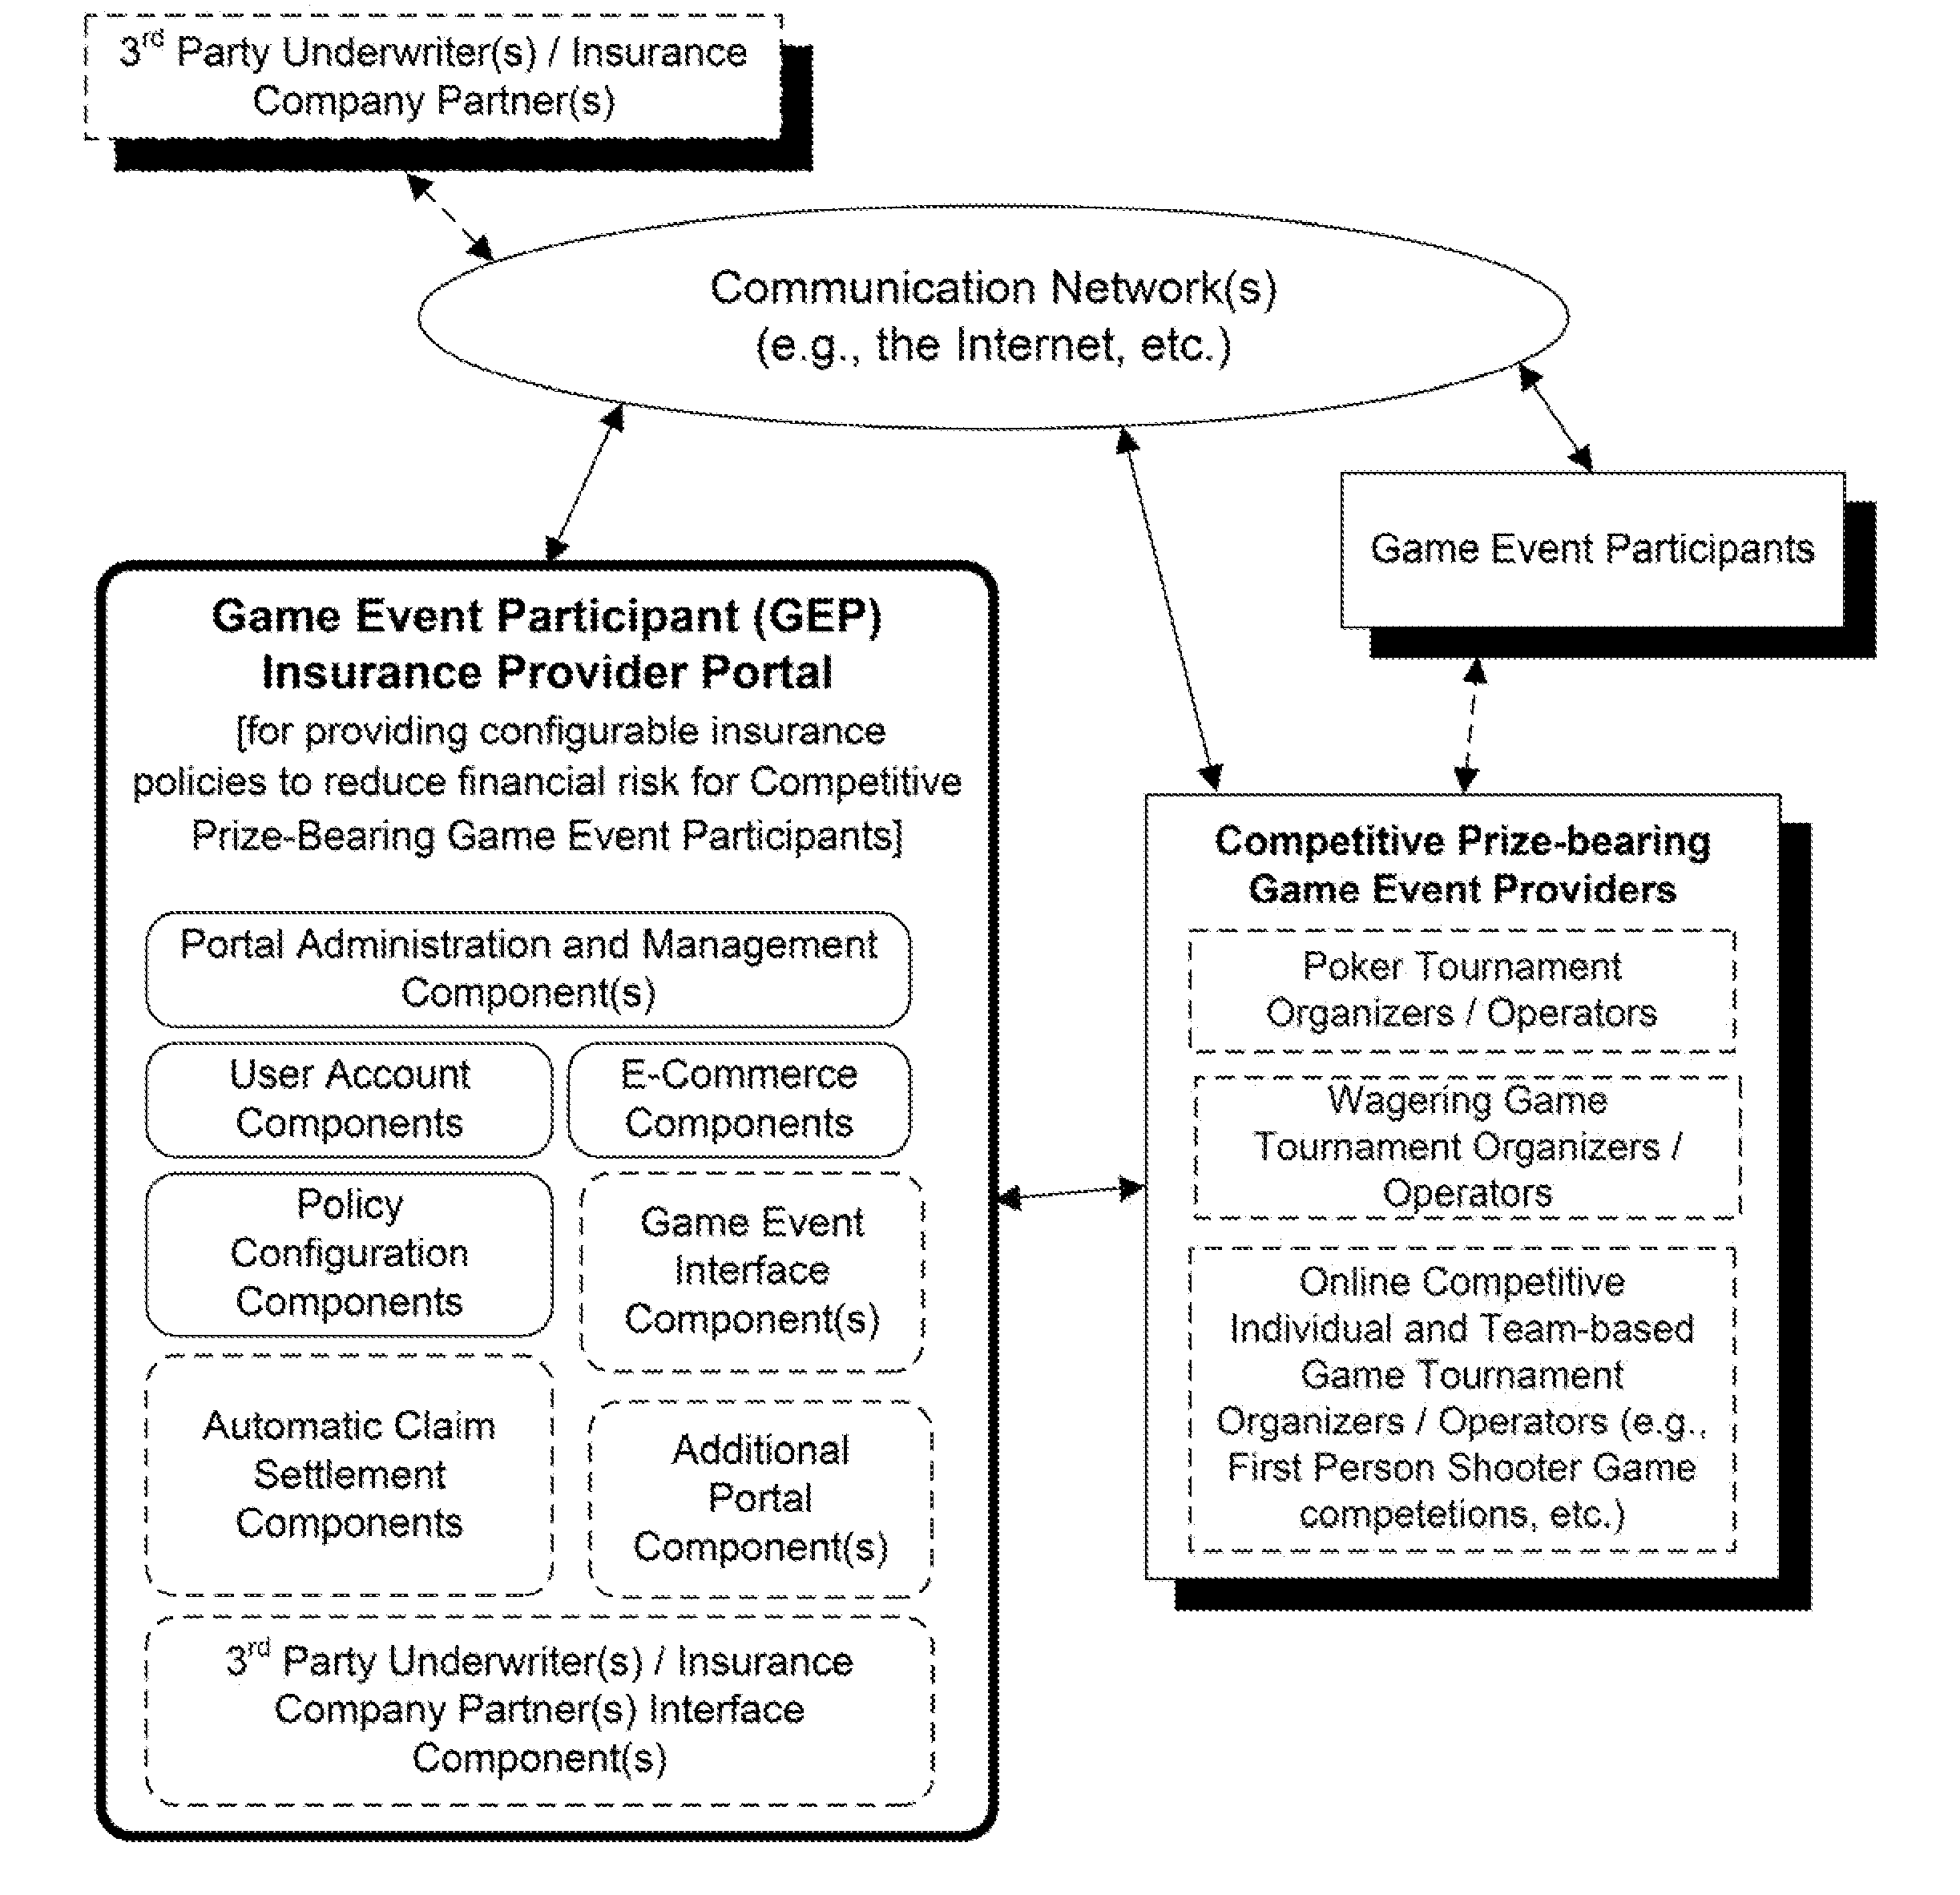 System and Method for Providing Dynamic Insurance Policy Claim and Contest Entry Claim Resolution Infrastructure for Automatically Identifying and Settling Valid Insurance Claims in connection with Previously Acquired Competitive Prize-Bearing Game Event-Related Insurance Policies, and for Automatically Identifying and Resolving Valid Claims in connection with Prize-Bearing Contests